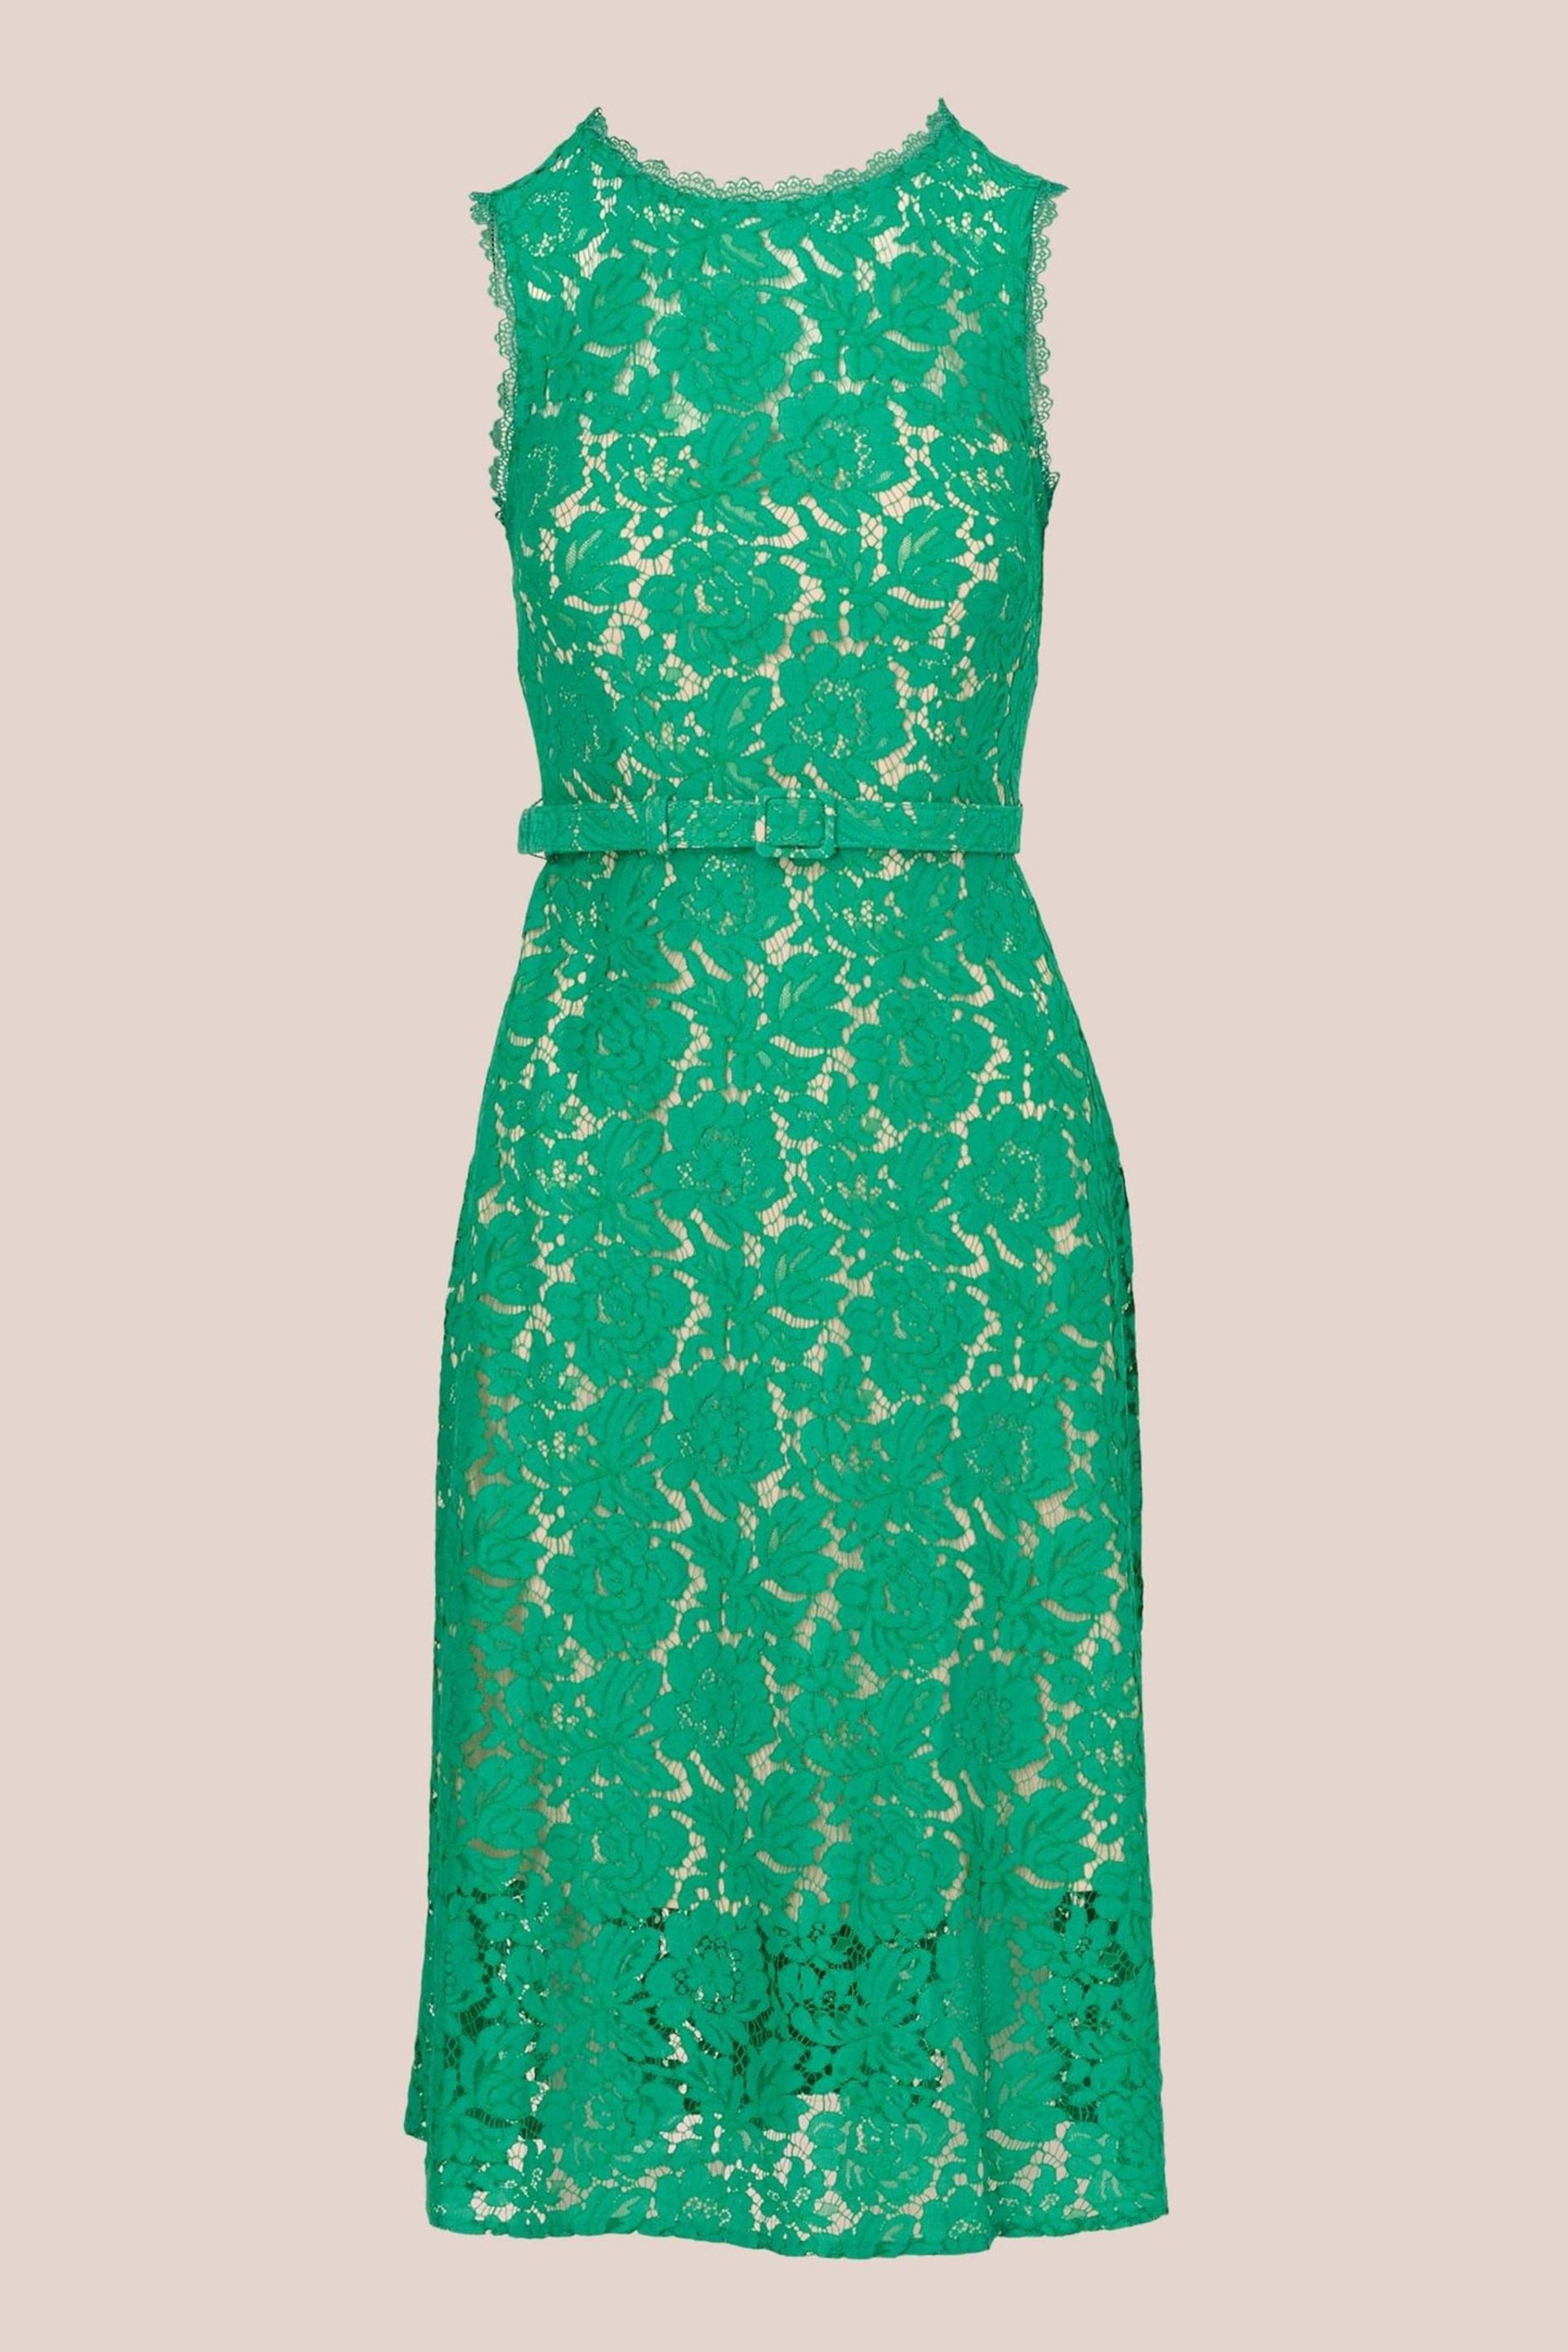 Adrianna Papell Green Lace Midi Dress - Image 5 of 7